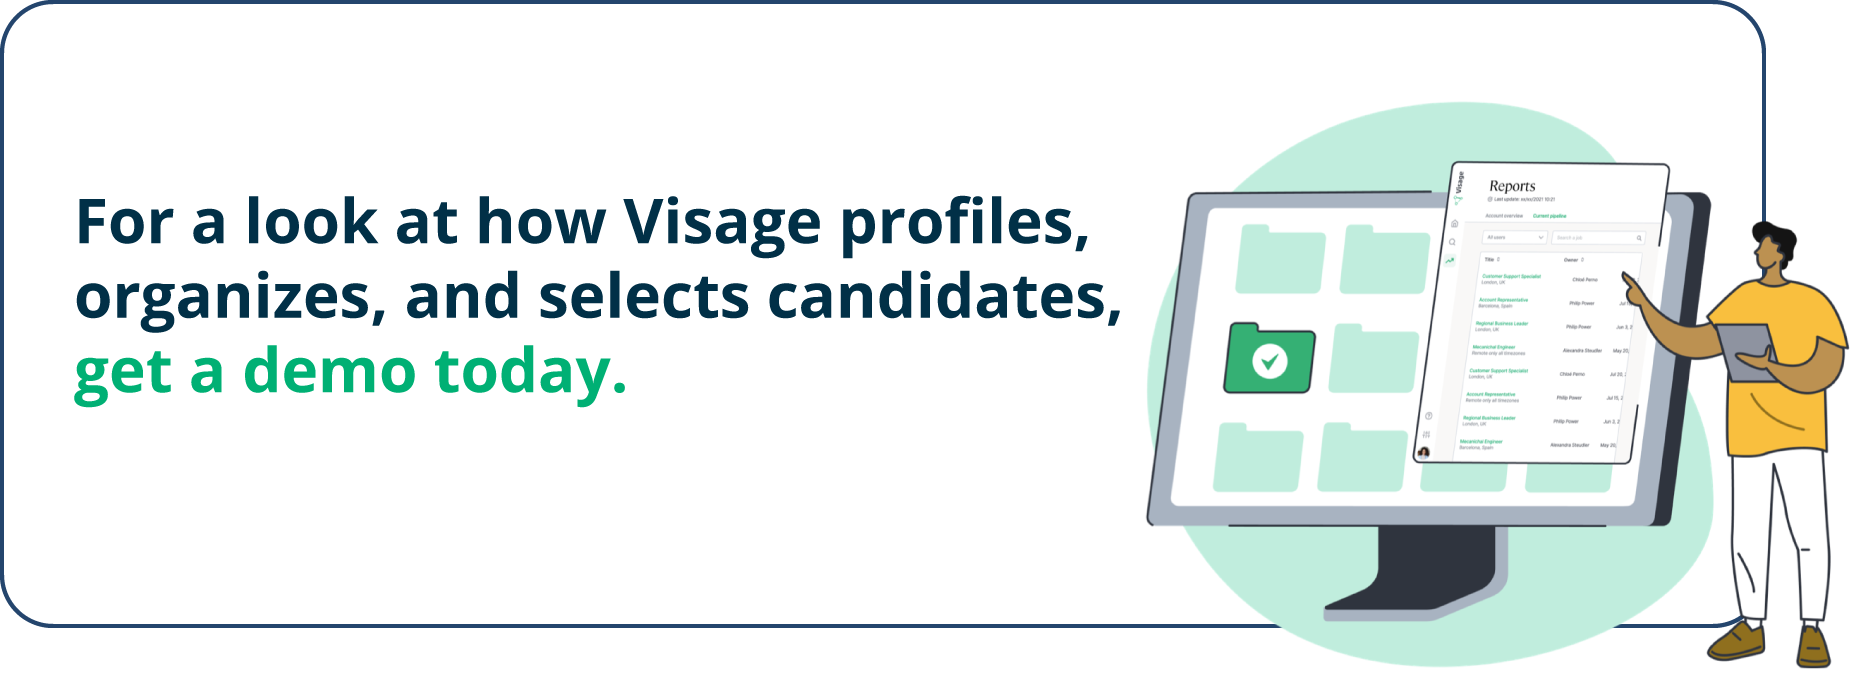 For a look at how Visage profiles, organizes, and selects candidates, get a demo today.